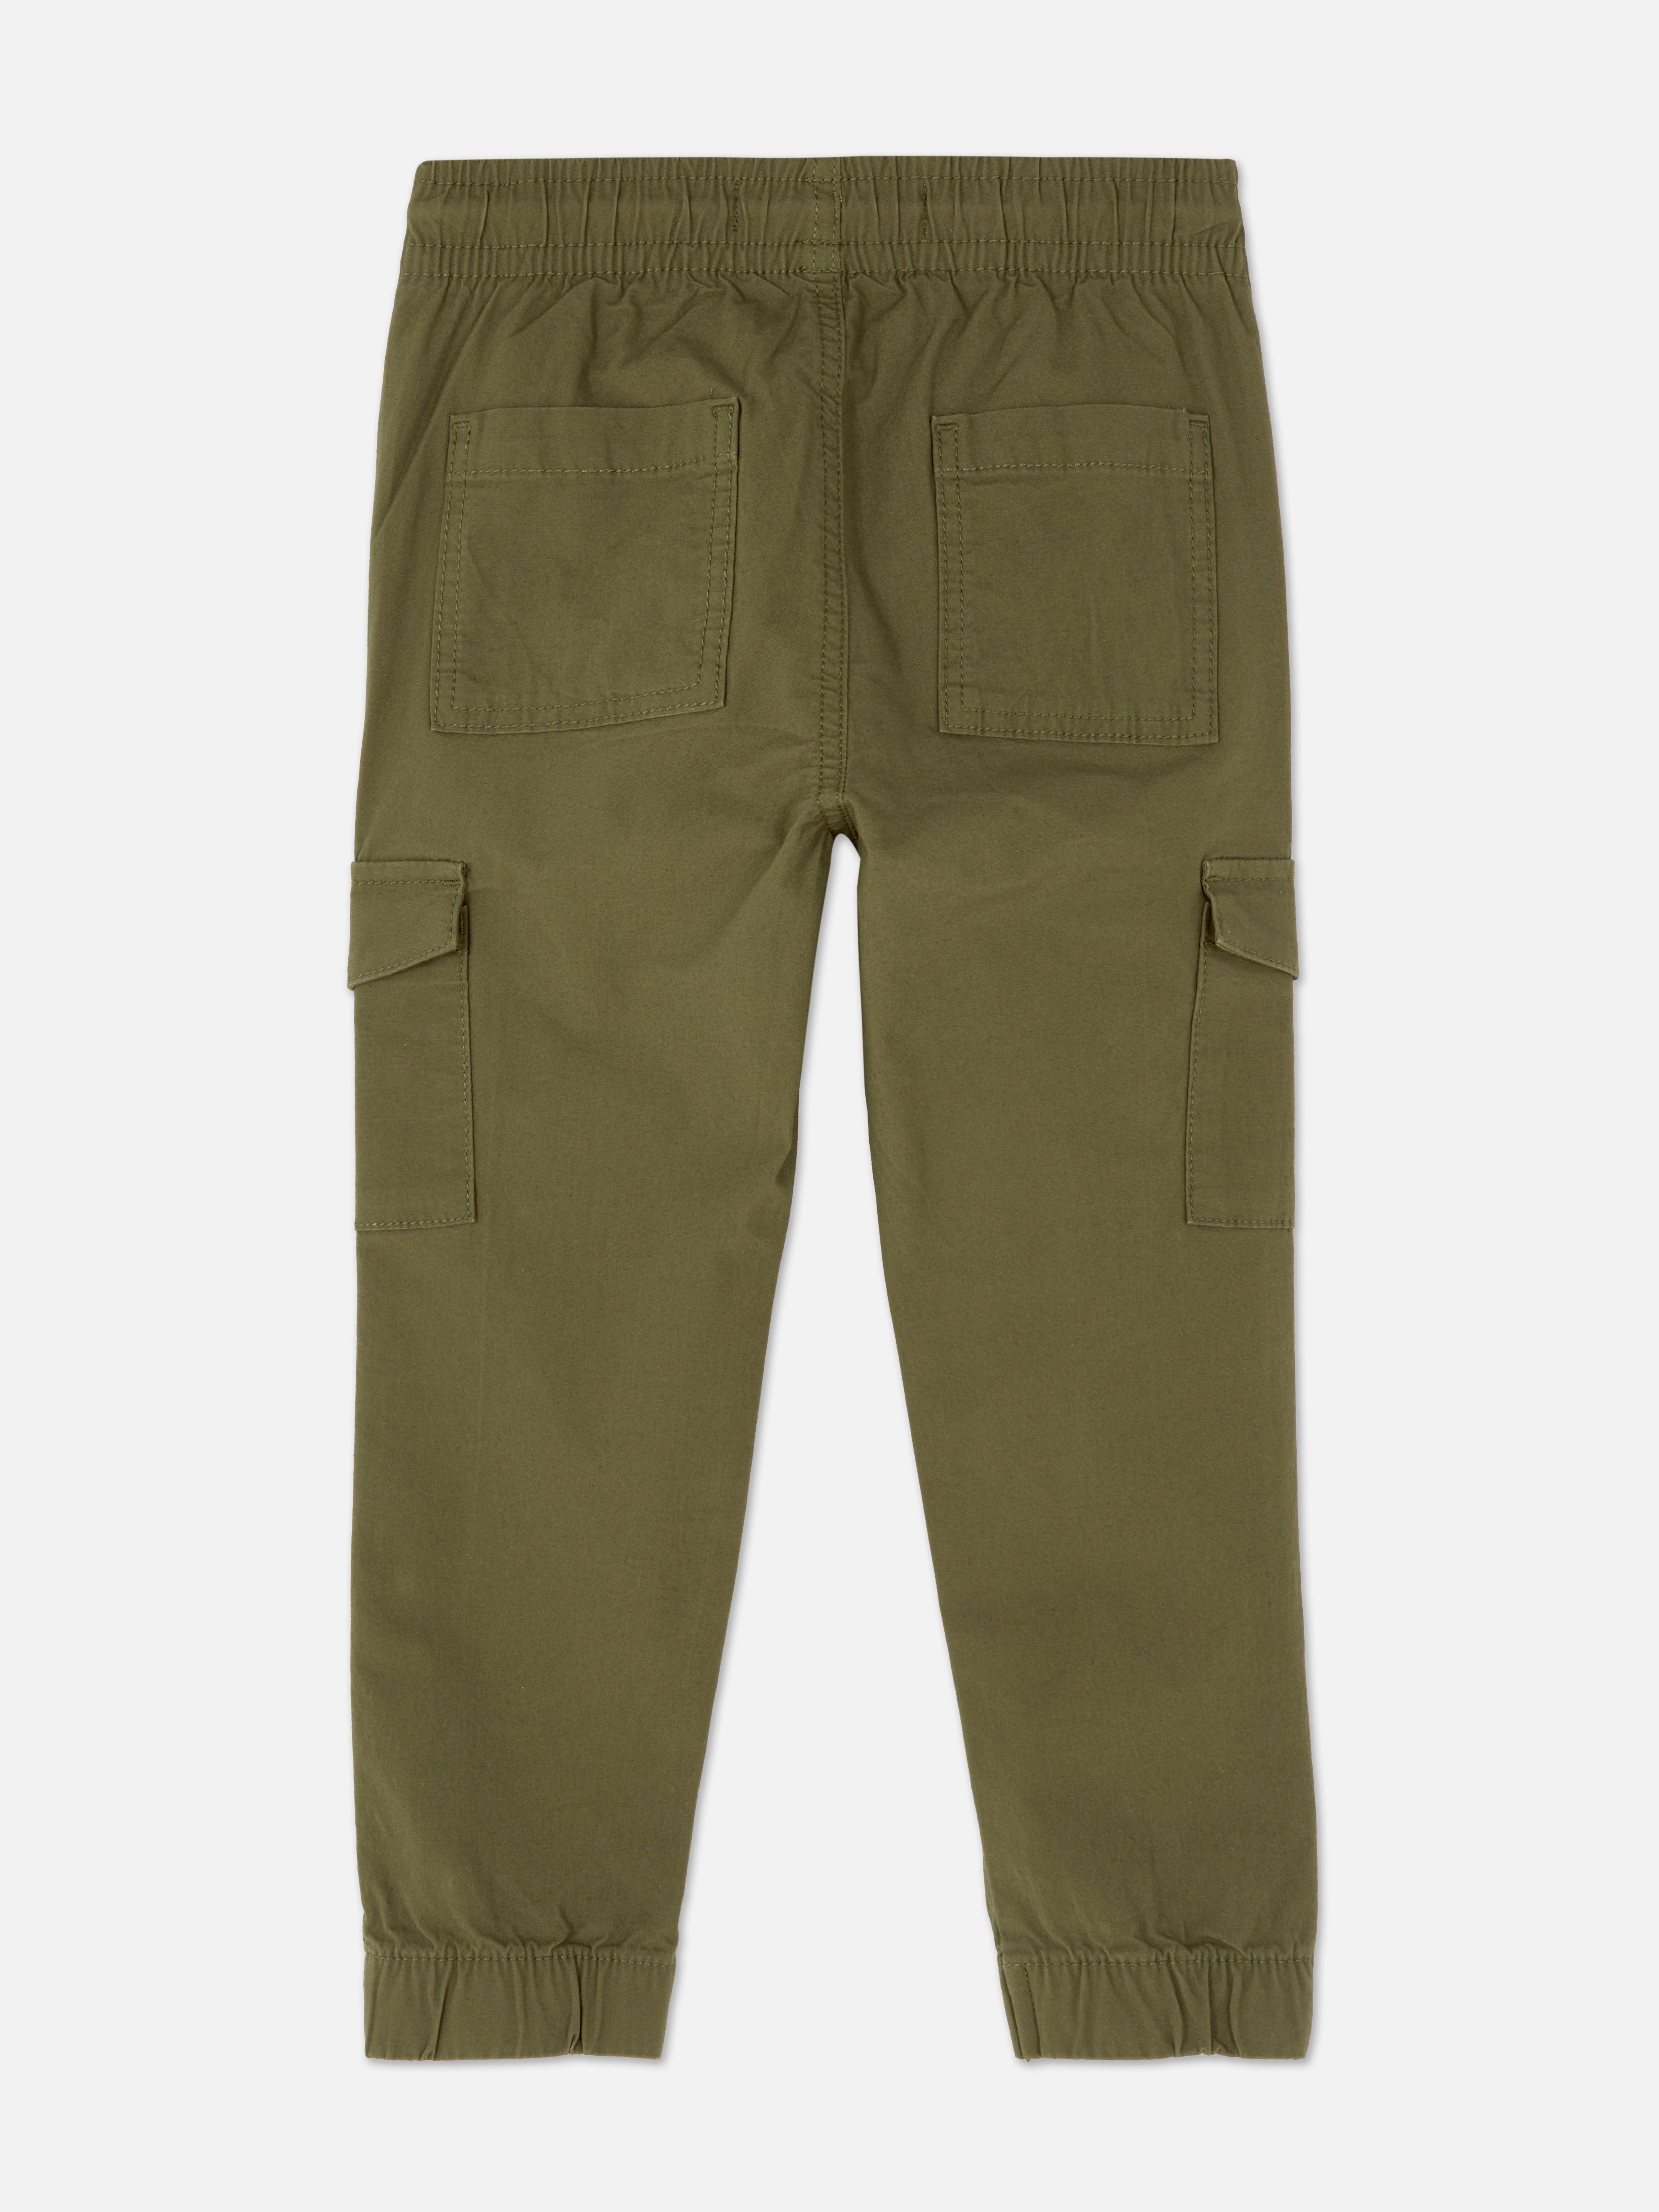 Primark Girls Cargo Parachute Pants, Pull-on, Green Lime Color, Size 10-11  y.o.